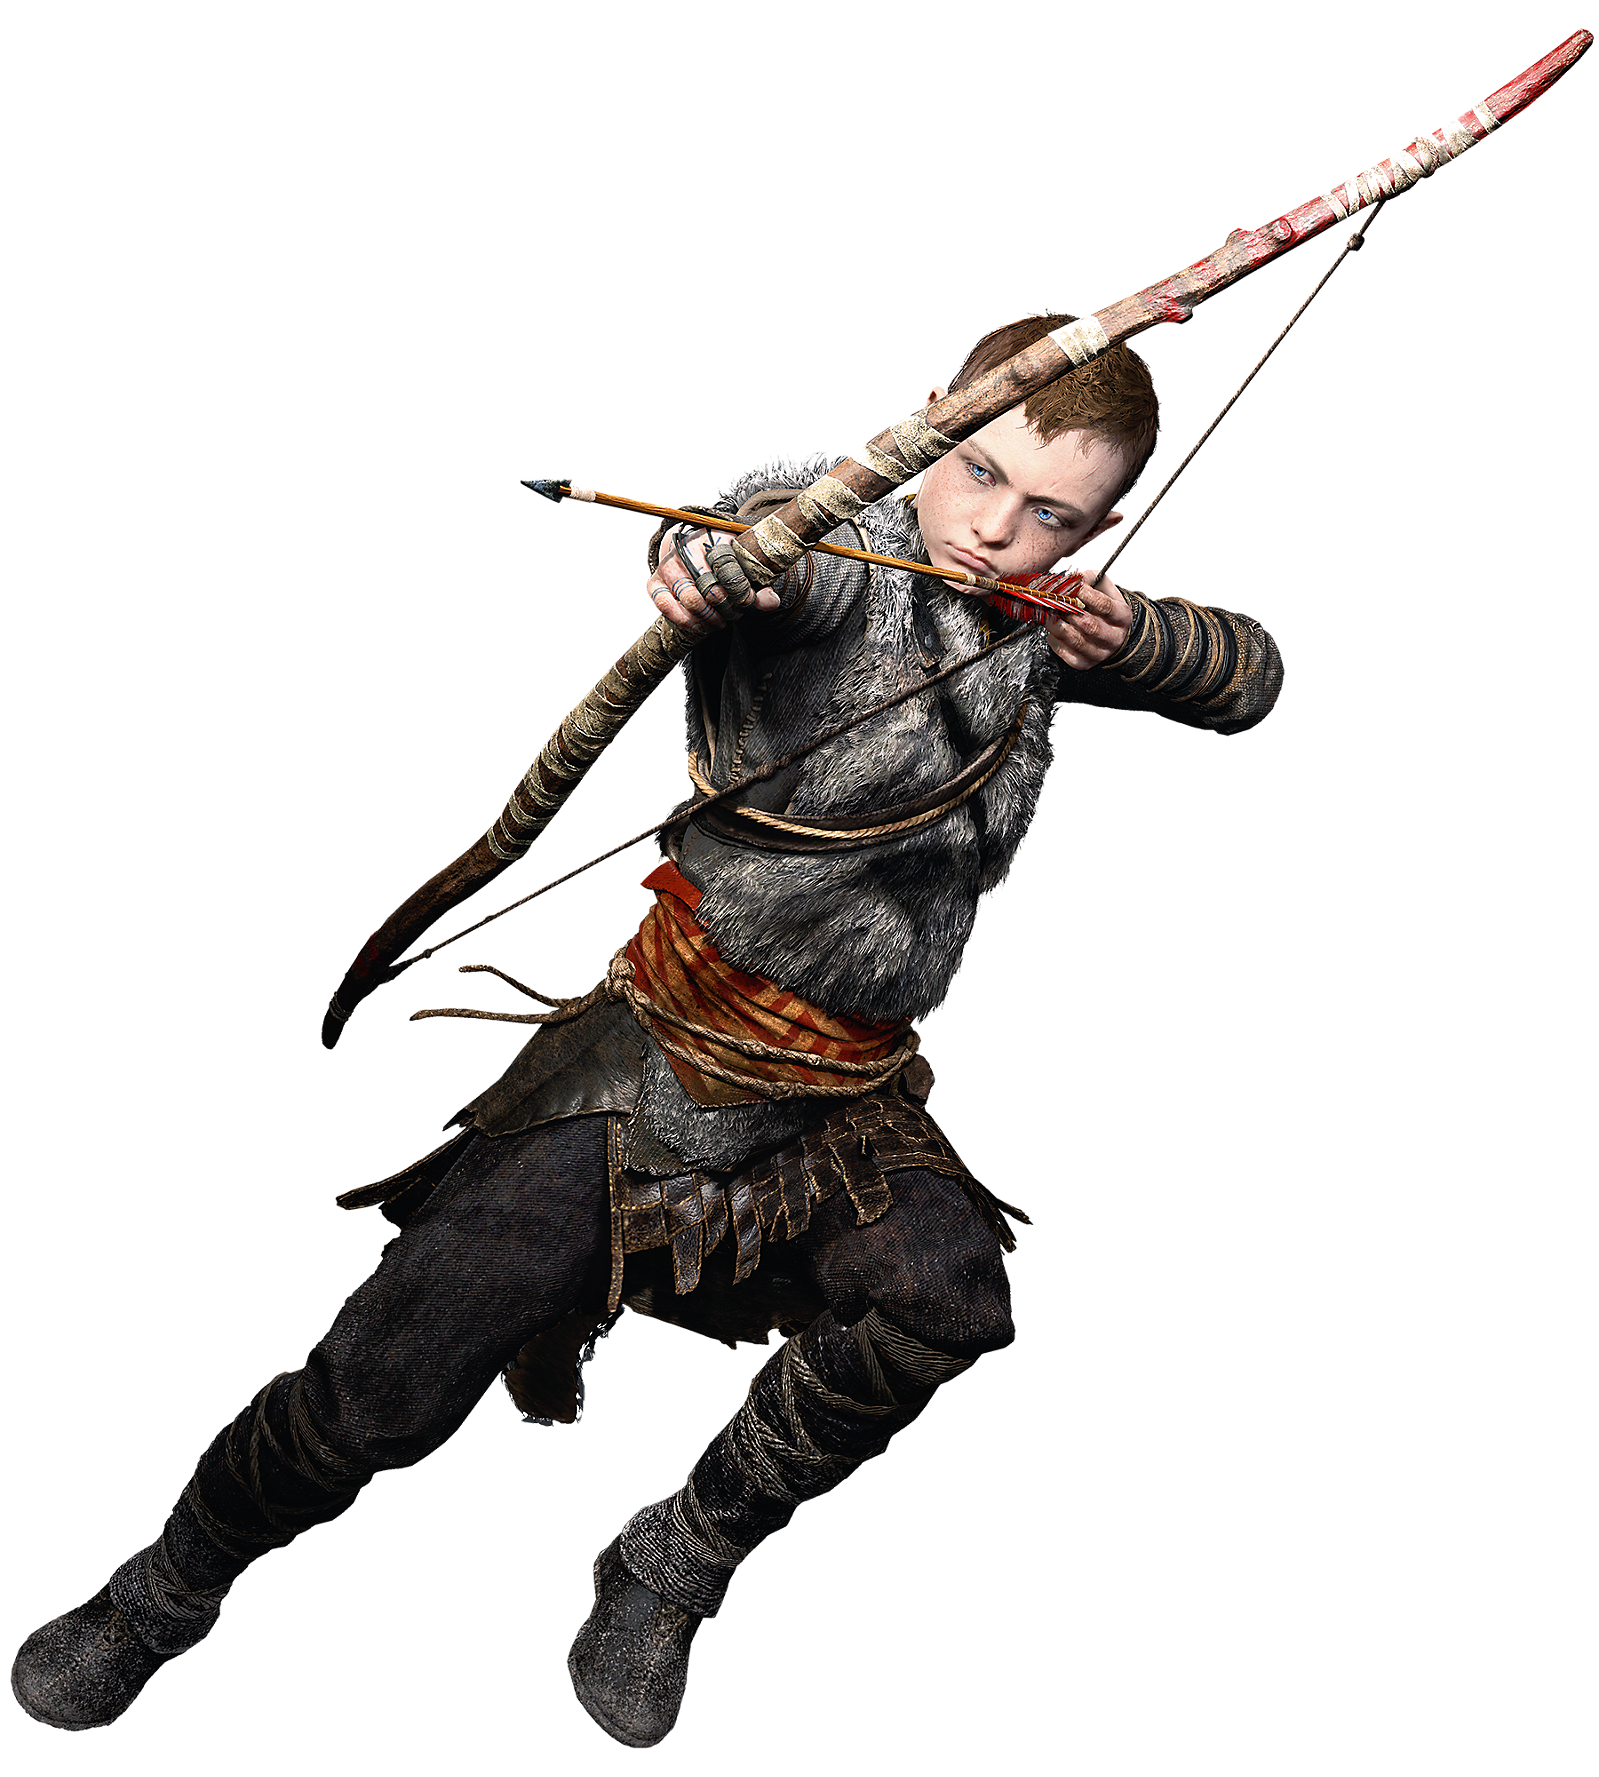 Atreus' New Outfit In God Of War Ragnarok Has A Hidden Reference To Kratos'  Tattoos